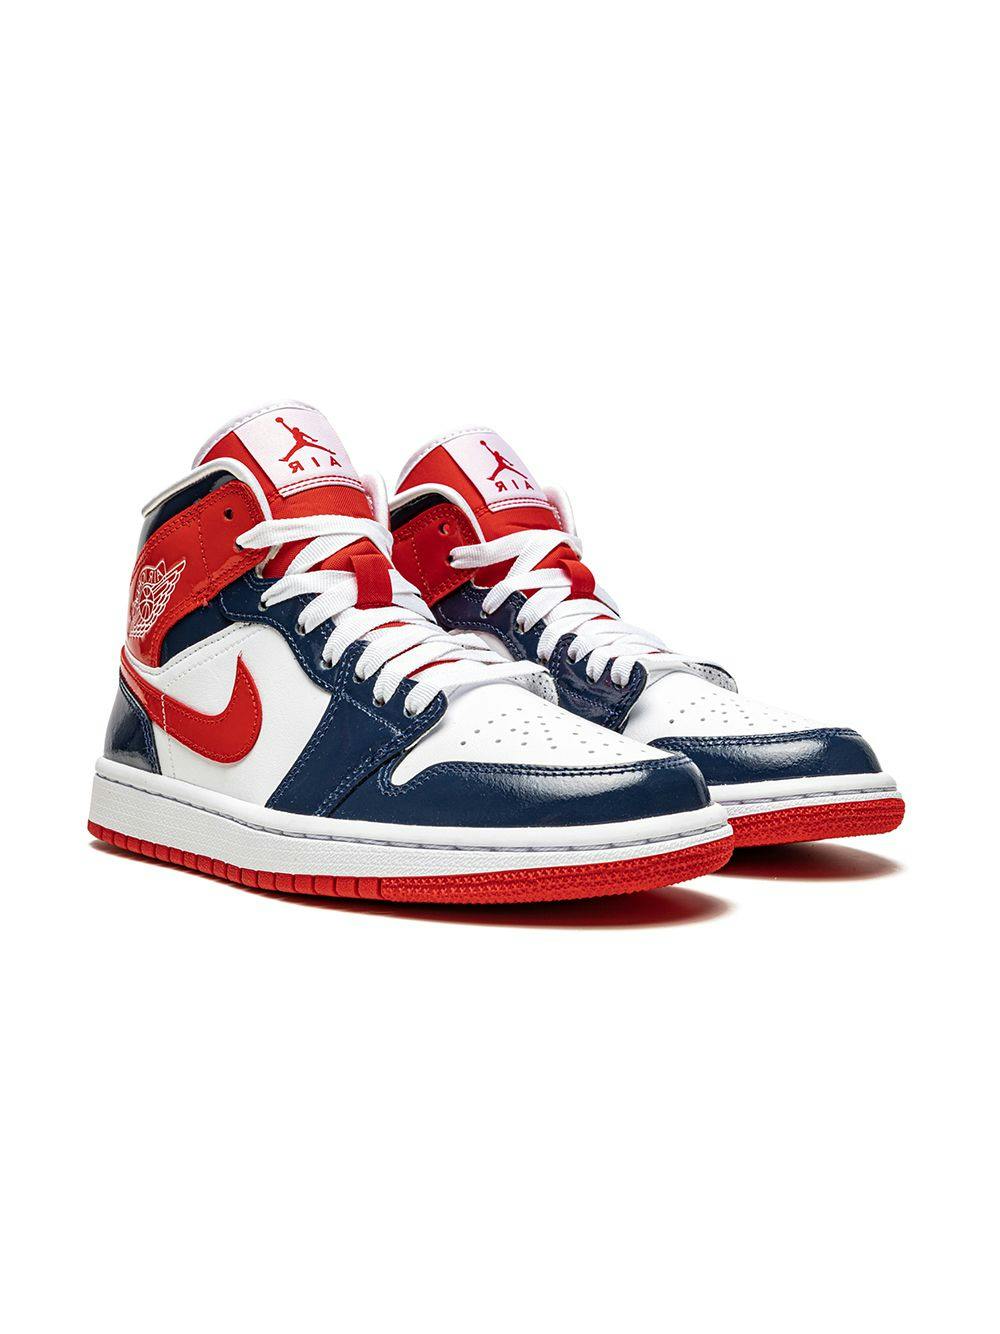 Air Jordan 1 Mid "Patent Leather Navy/White/Red" sneakers